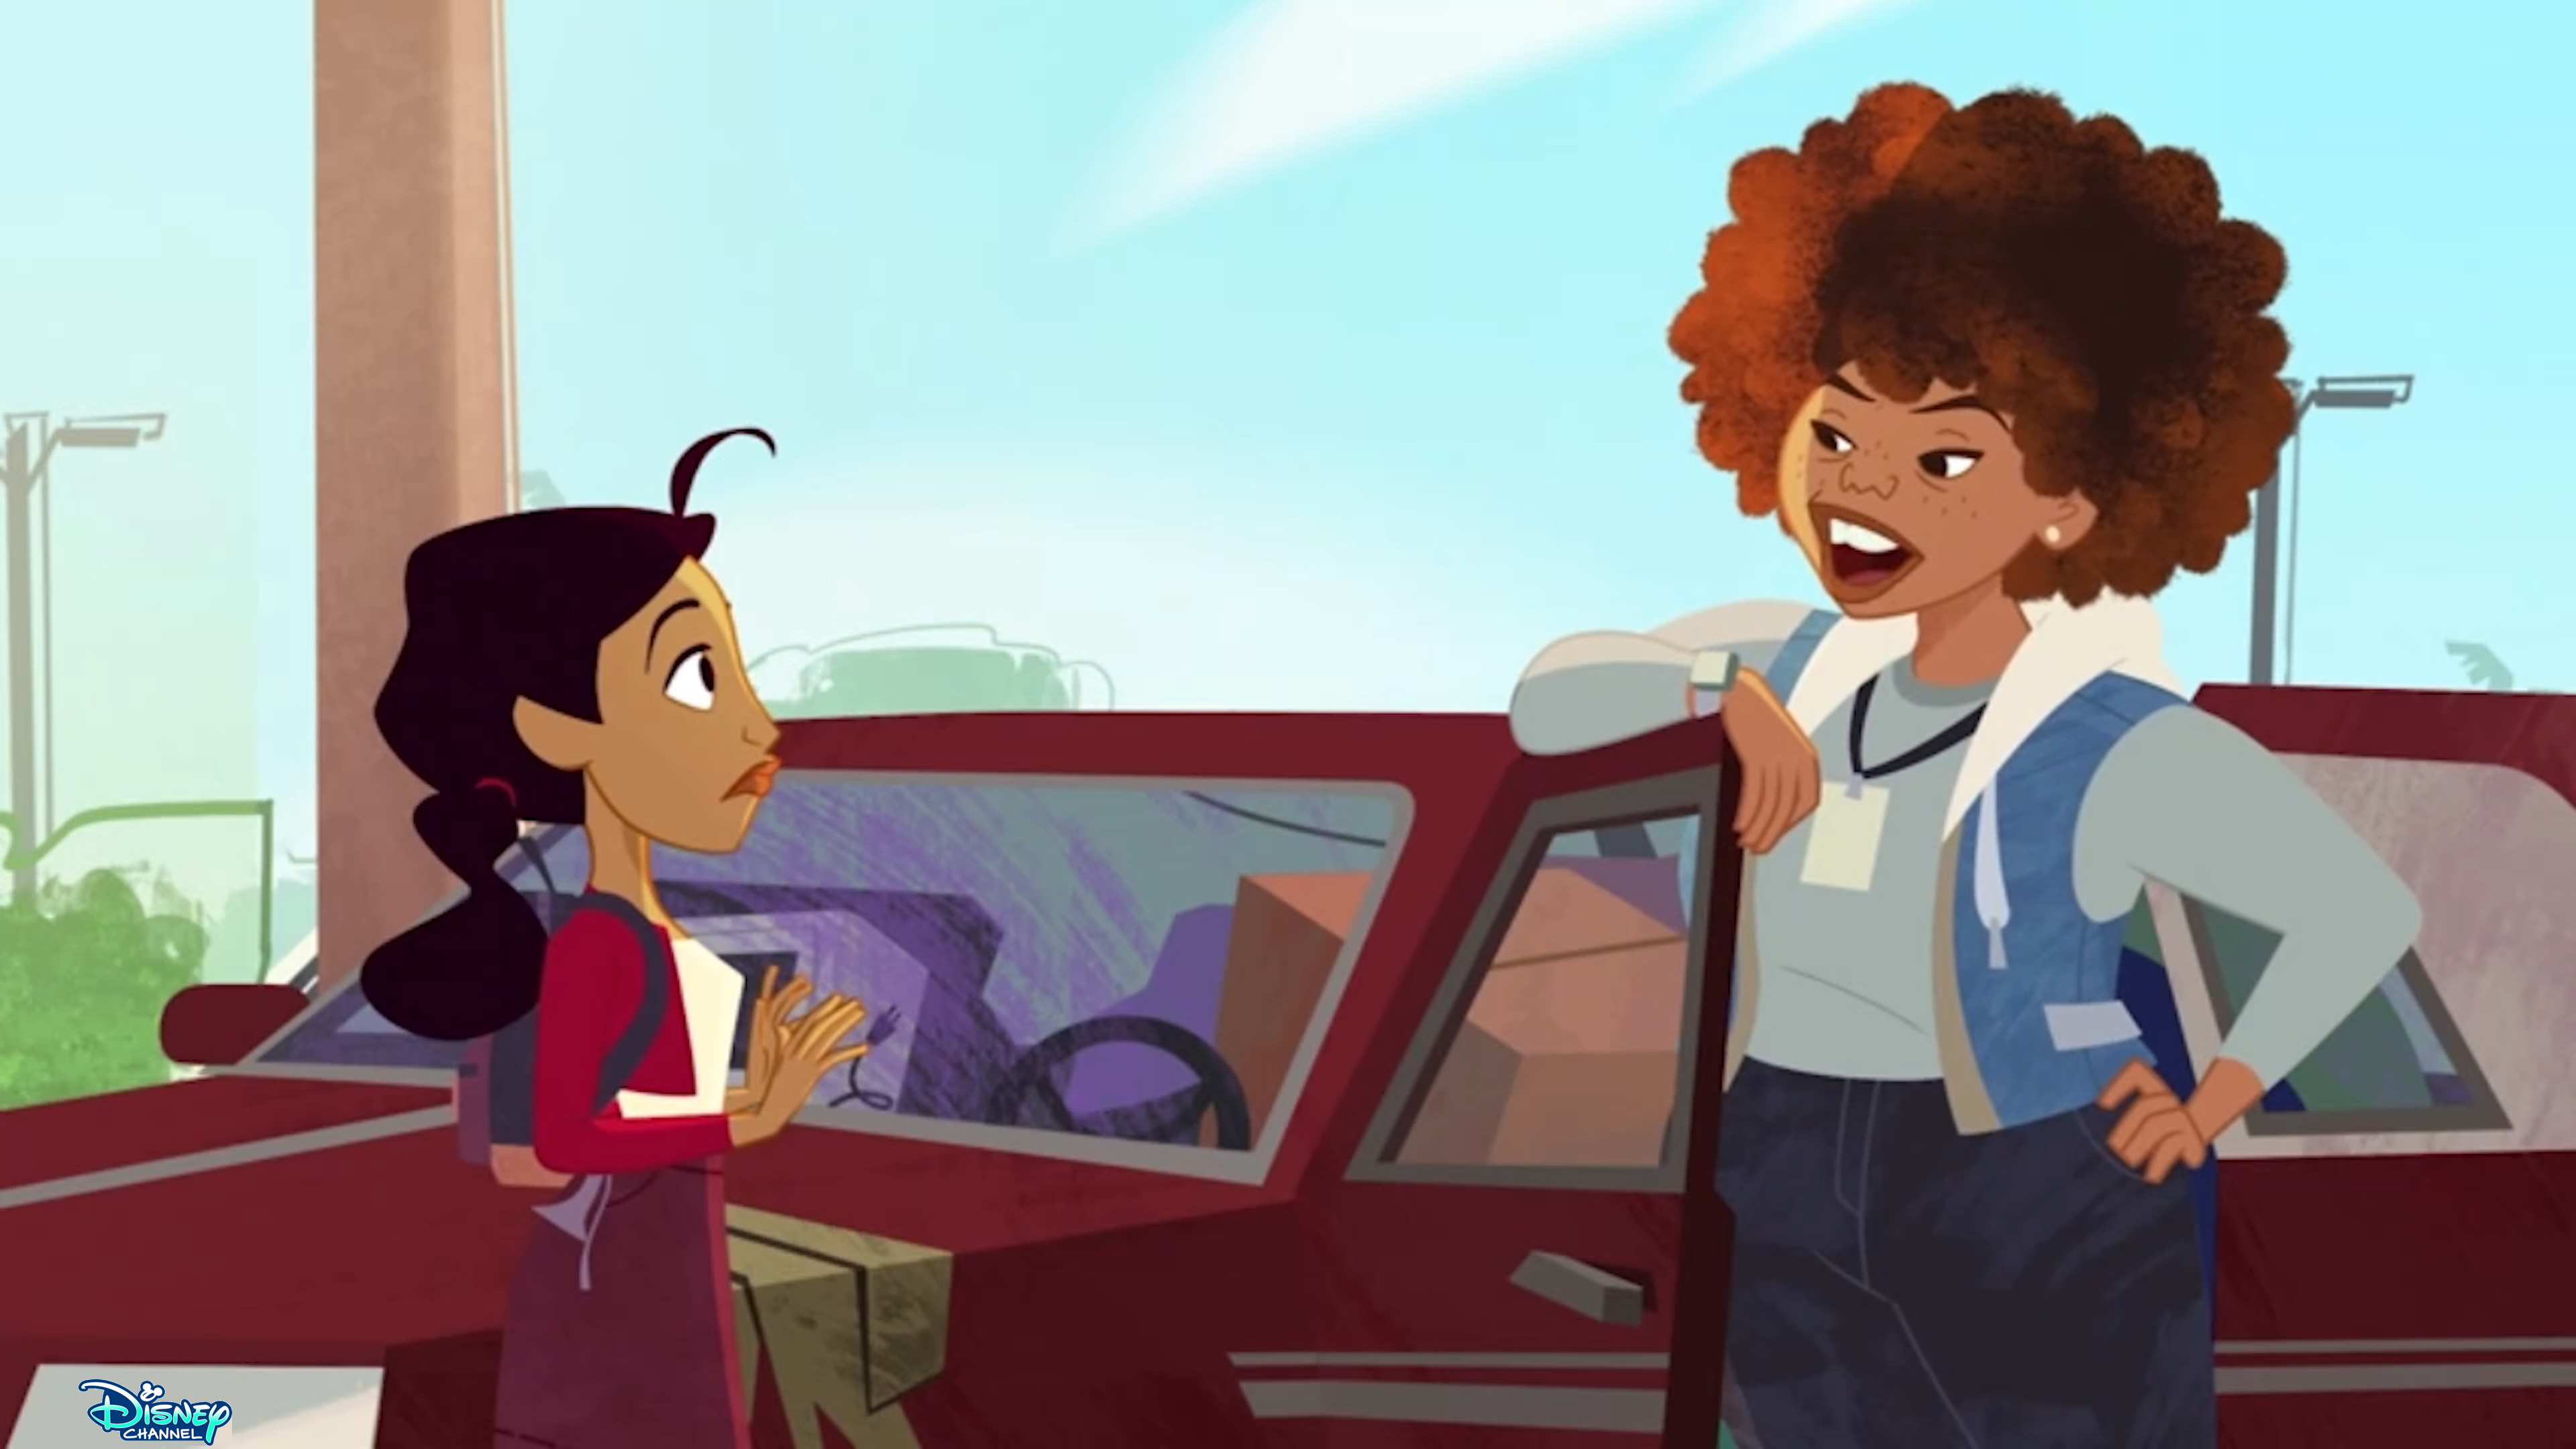  The Proud Family: Louder and Prouder - nyumbani School Promo Disney Channel 1